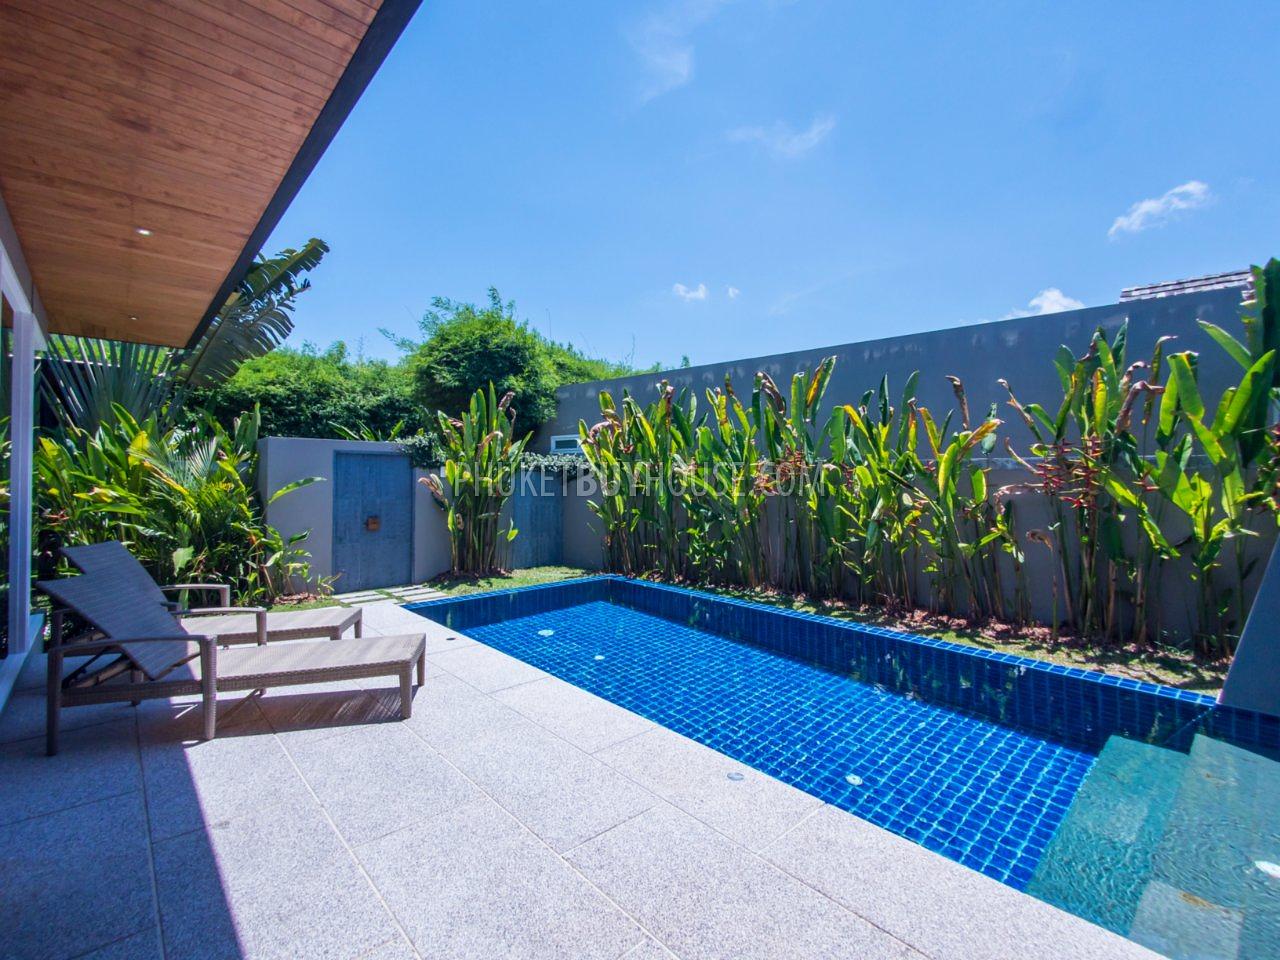 LAY4522: Tropical modern villa with 2 bedrooms in Layan. Photo #4